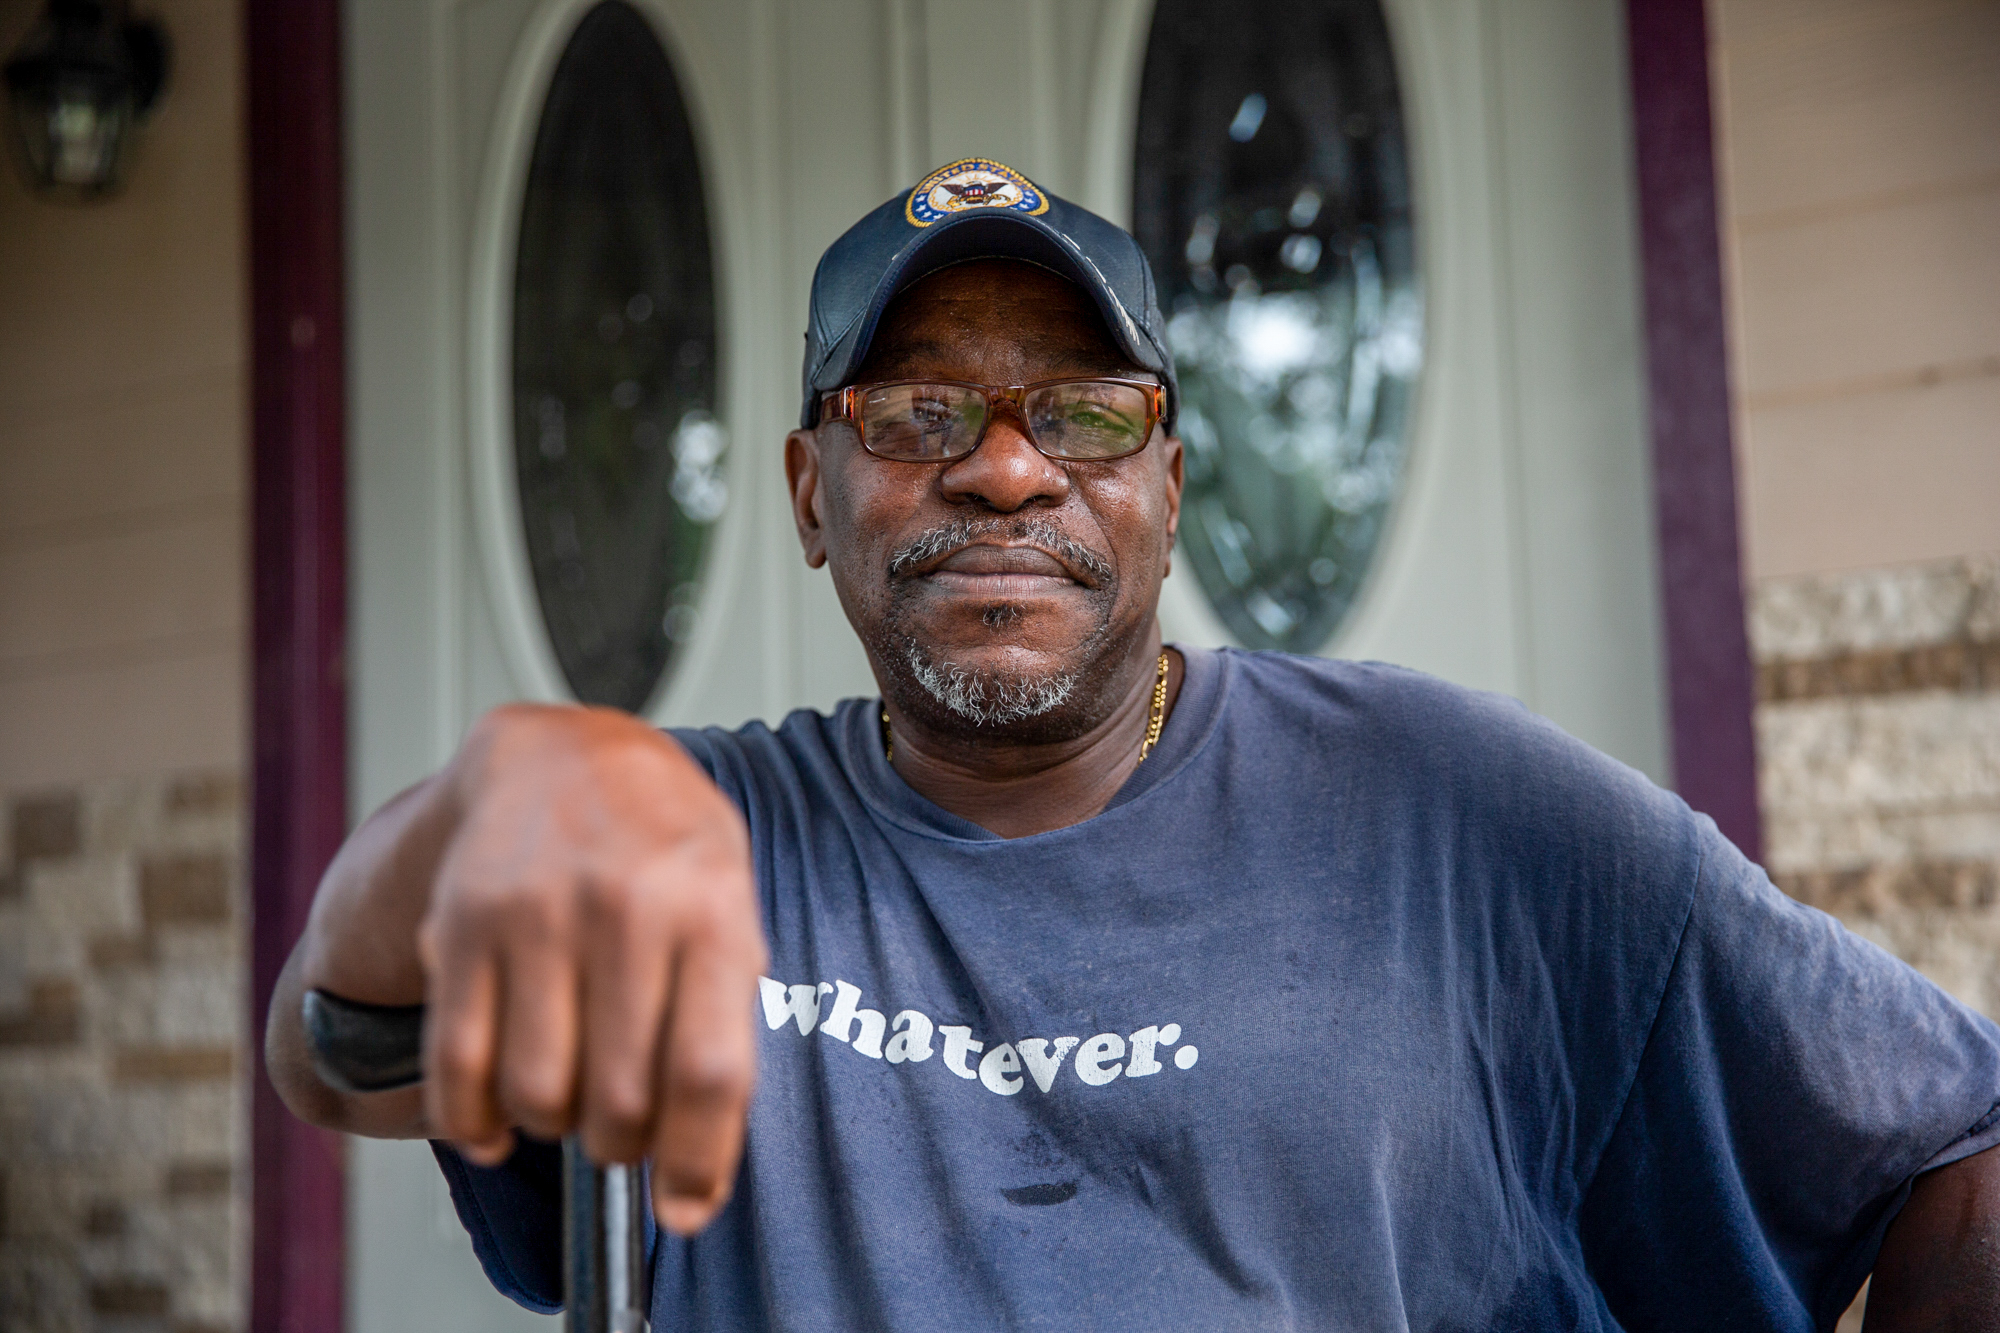 Forrester Johnson - Forrester Johnson and his wife lived in a handicap-accessible FEMA trailer for a 18 months after Hurricane Harvey. The couple moved back into their home, even though it wasn't finished, when FEMA began charging them $750 a month to stay in the trailer. Johnson now owes $1,500 he doesn't have because every penny has gone into rebuilding the house. (Stacy Fernández/News21)